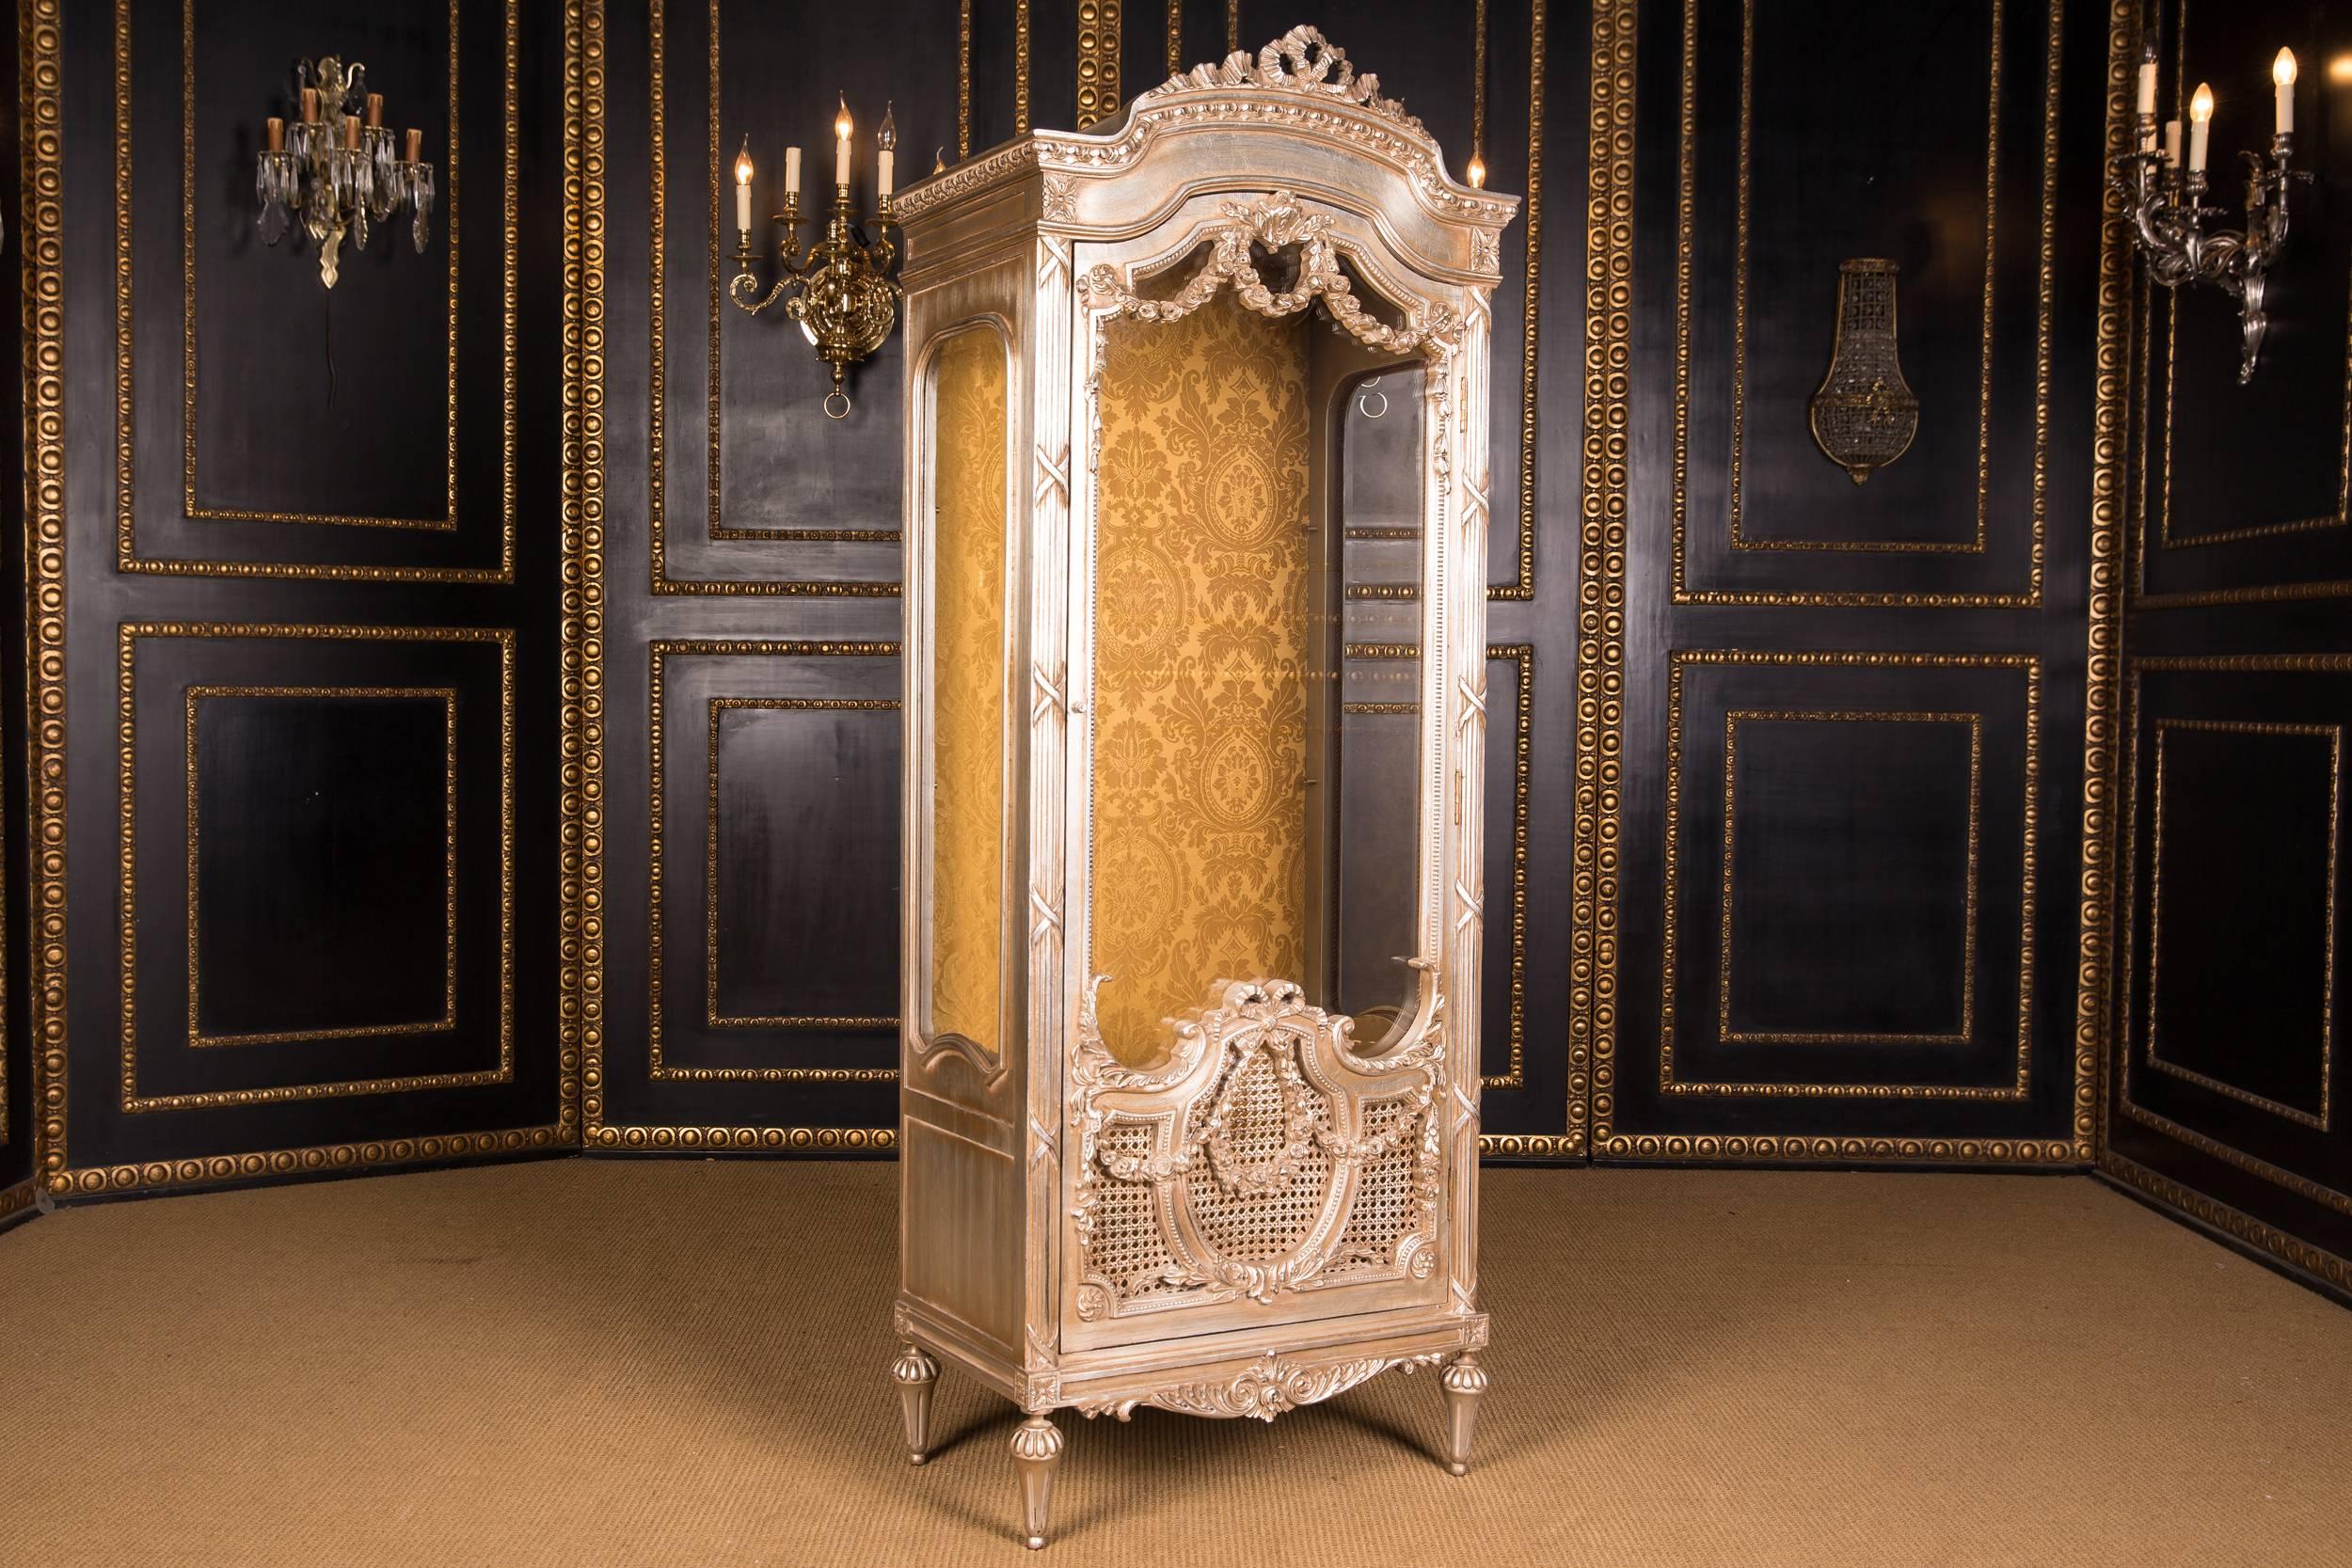 Massive beech, poliment silver. High-angled, three-sided, facet-cut glazed, one door body on conical legs. The door is partially covered with wickerwork. The front, corners and sides are decorated with carved, classical elements such as garlands and